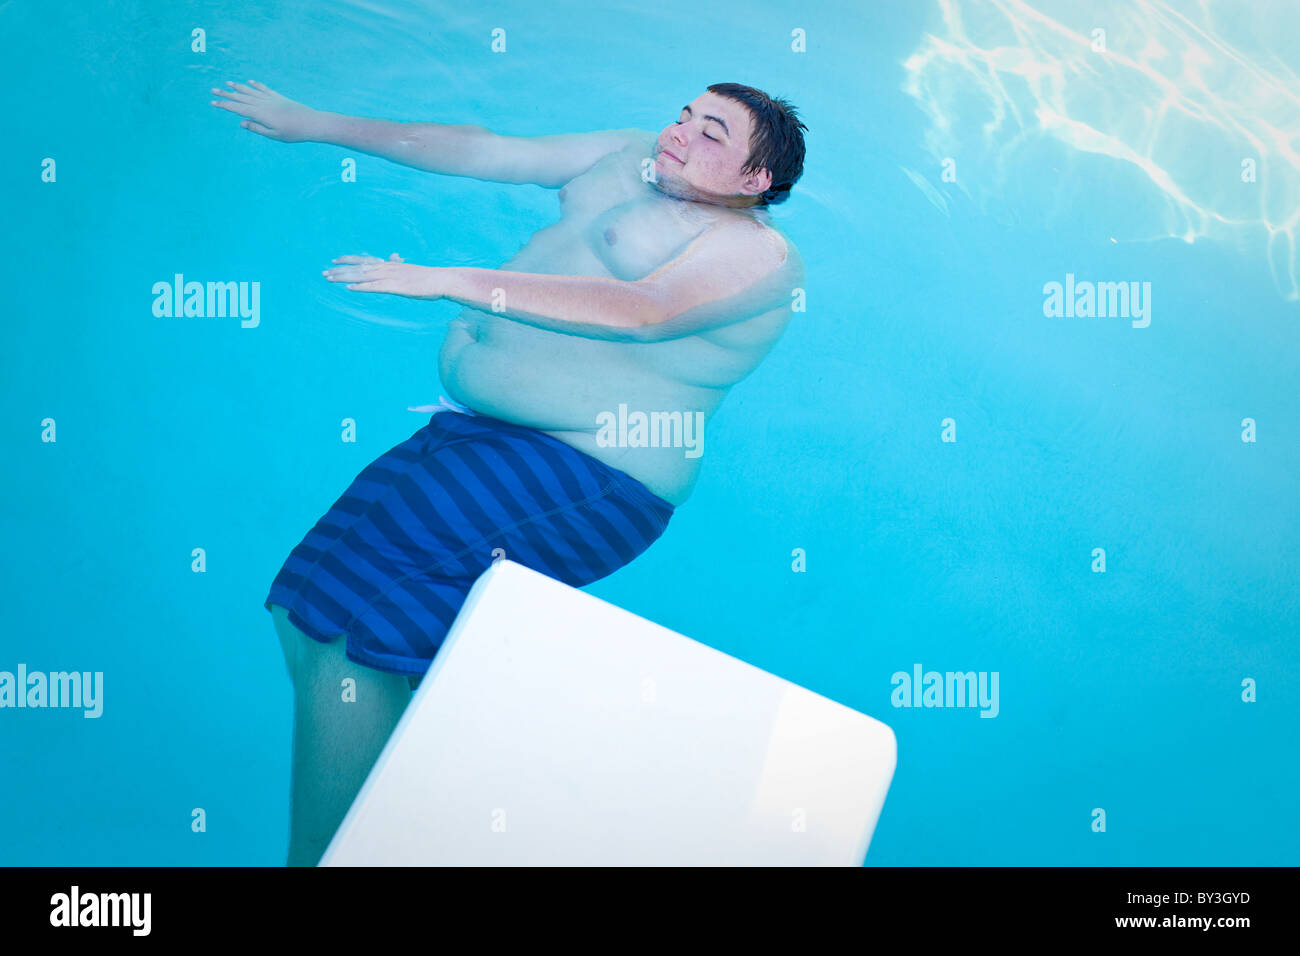 Hughson, California, United States.  An obese teenager floats in a swimming pool. Stock Photo